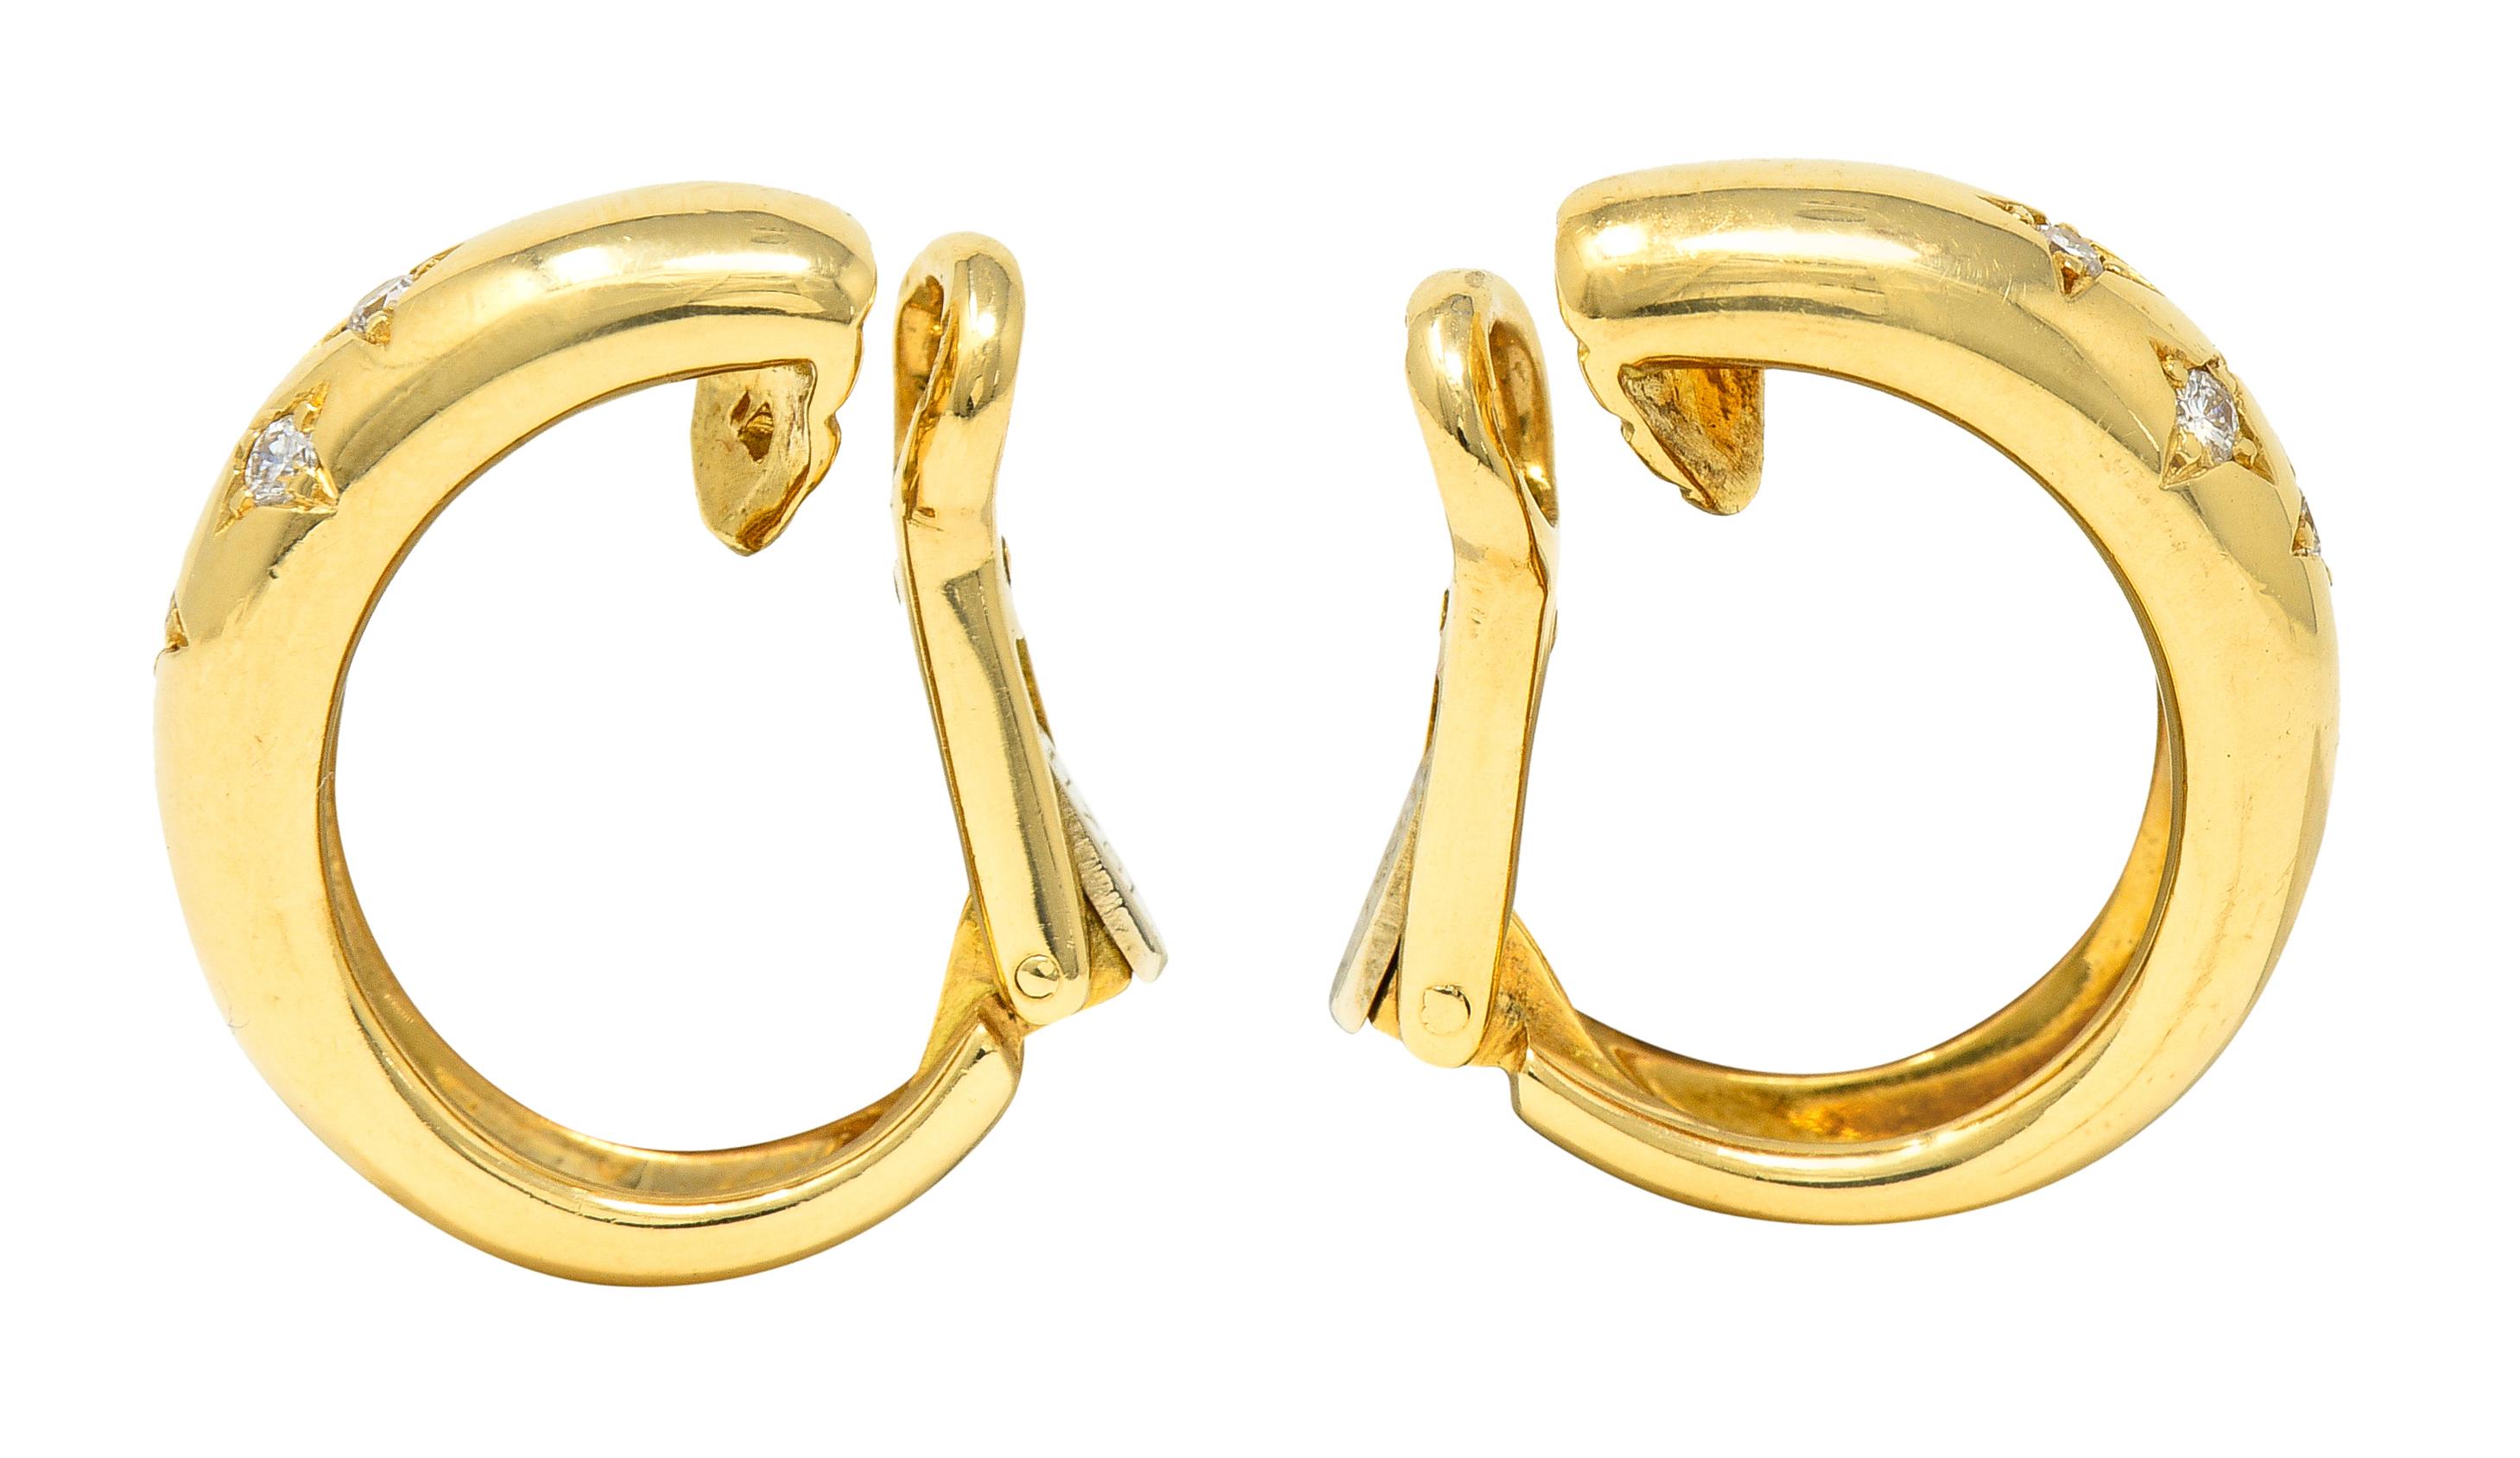 Ear-clip earrings are designed as high polished gold half-hoops with star motif

Featuring four bead set round brilliant cut diamonds in each star

Weighing approximately 0.24 carat total - G/H in color with VS clarity

Completed by hinged omega